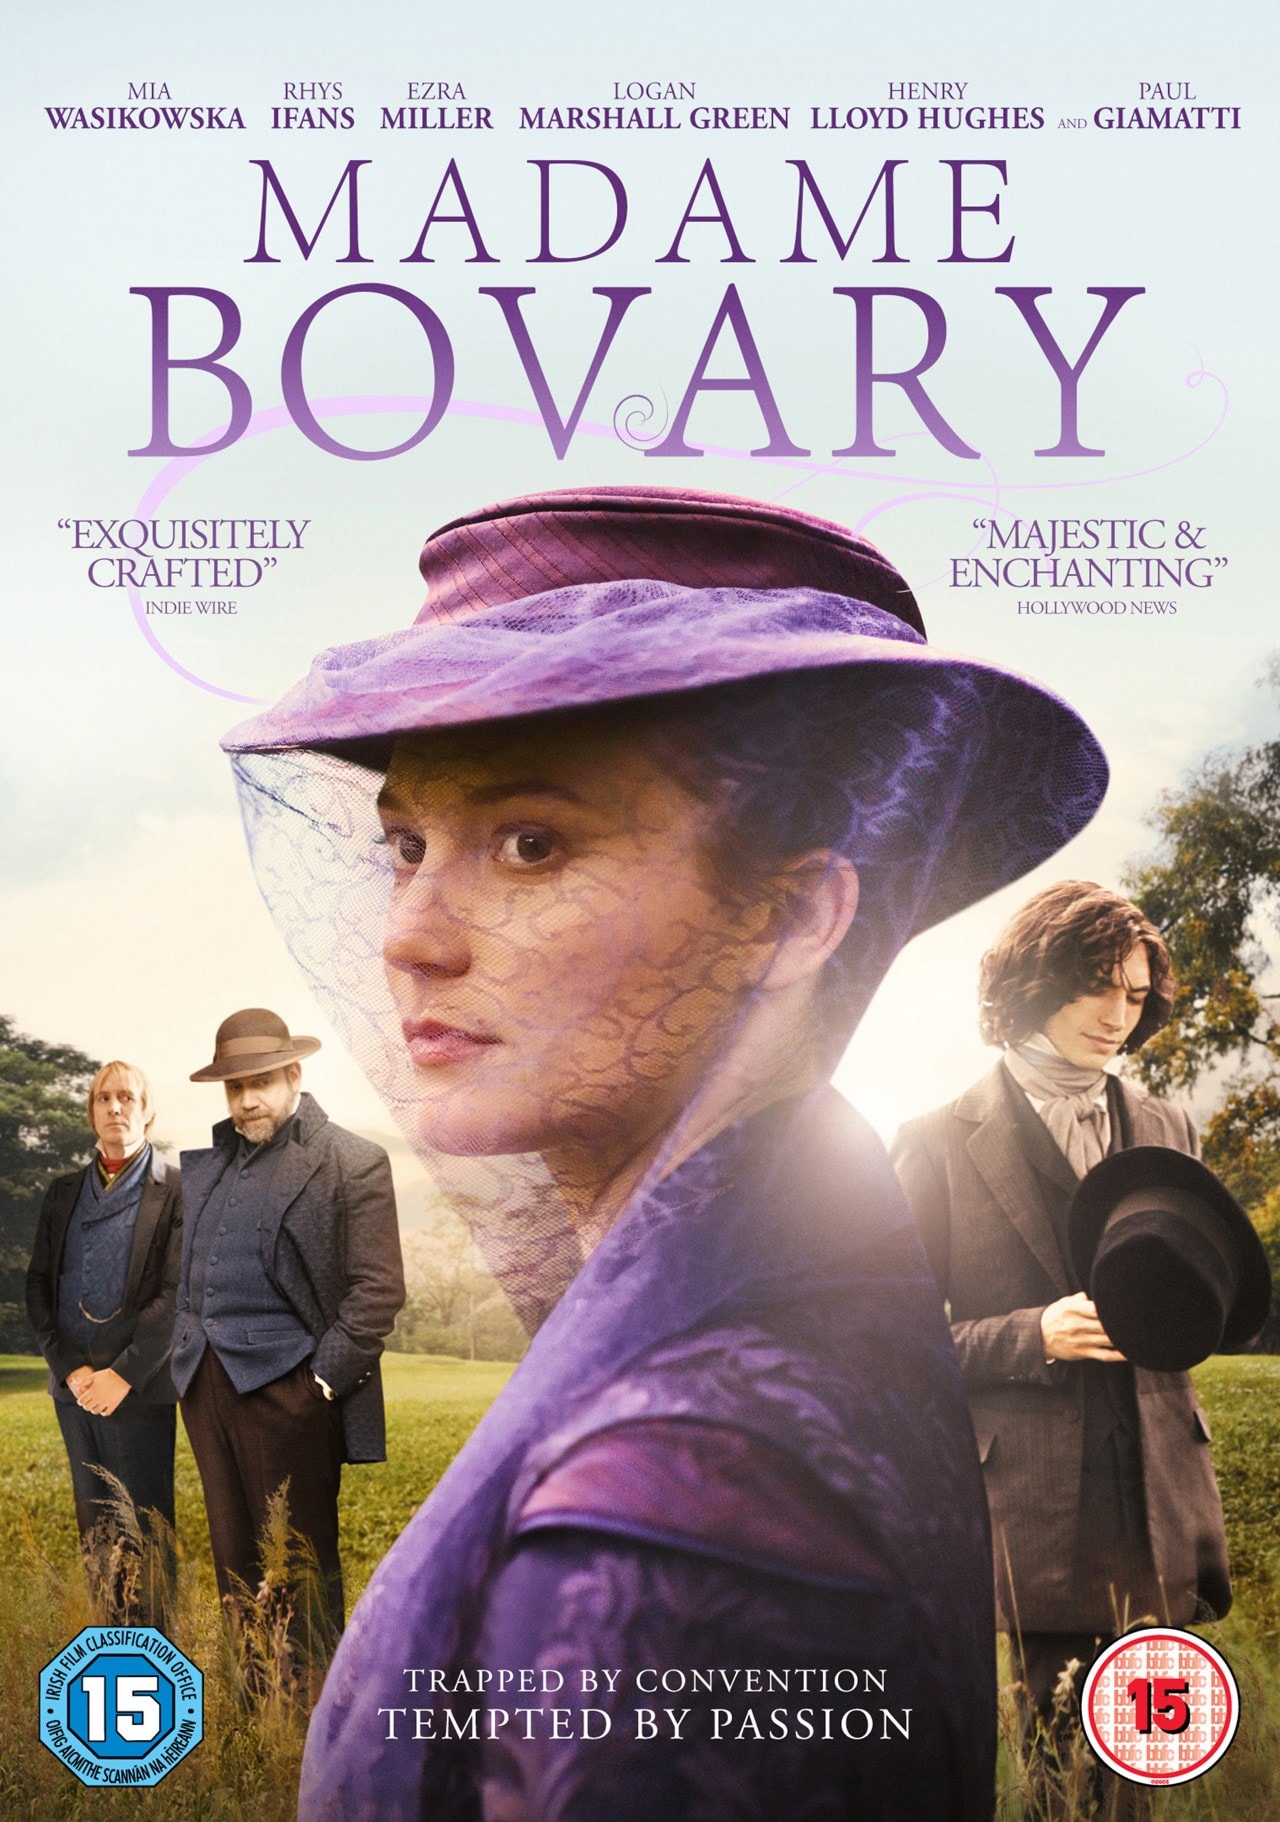 download the new version for ios Madame Bovary